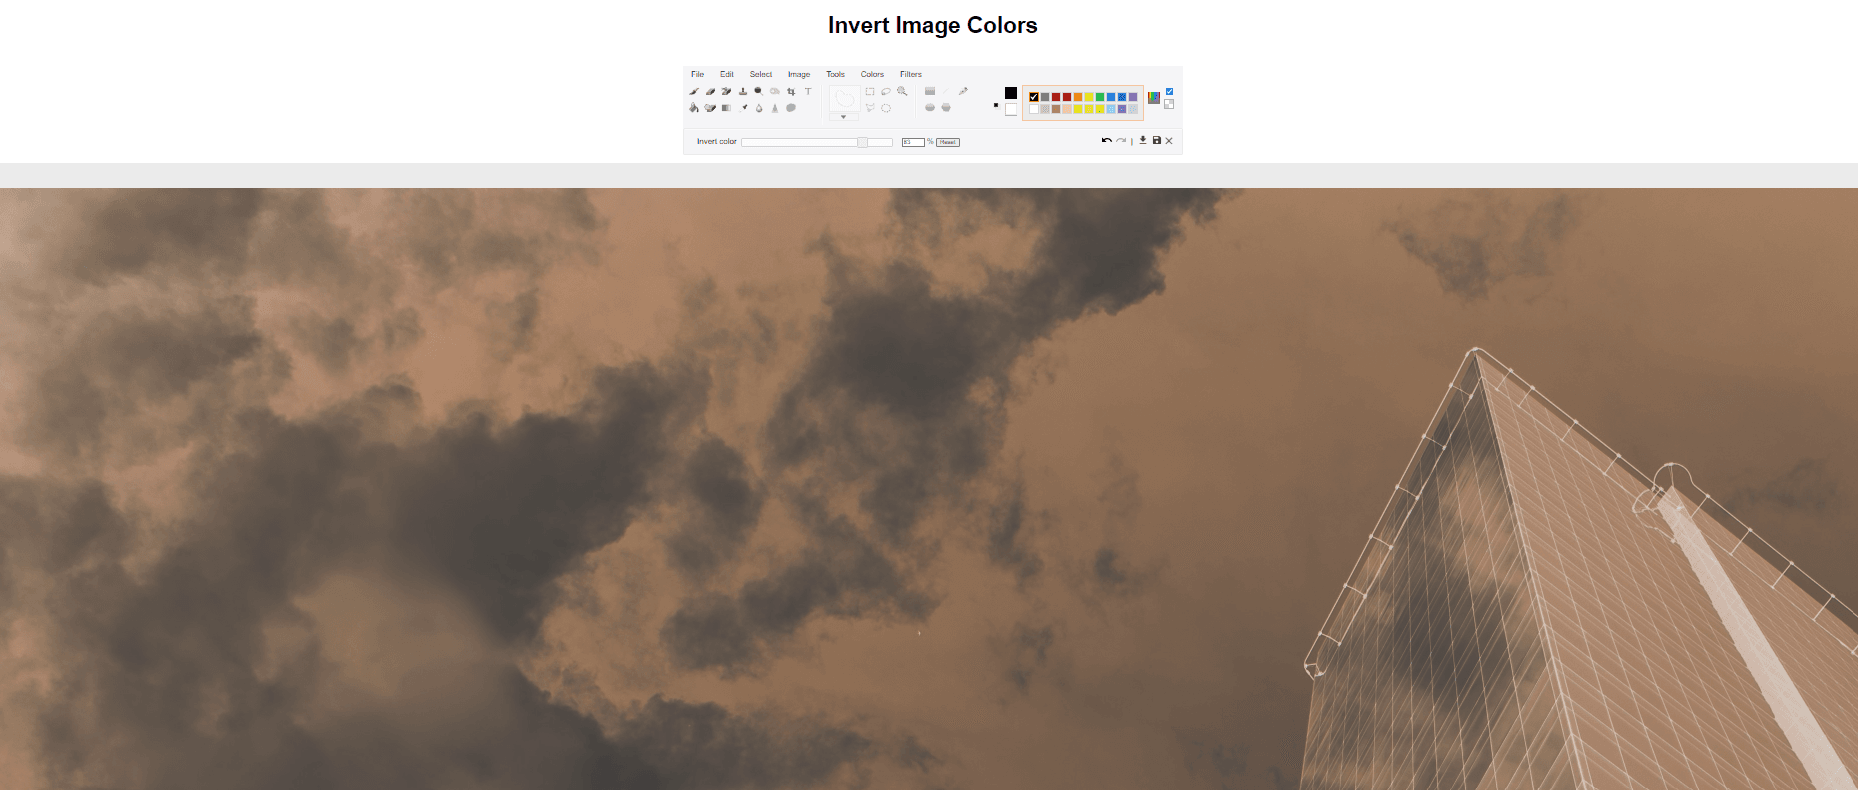  Gifgit – Free Online Tool for Manual Color Inversion Adjustments